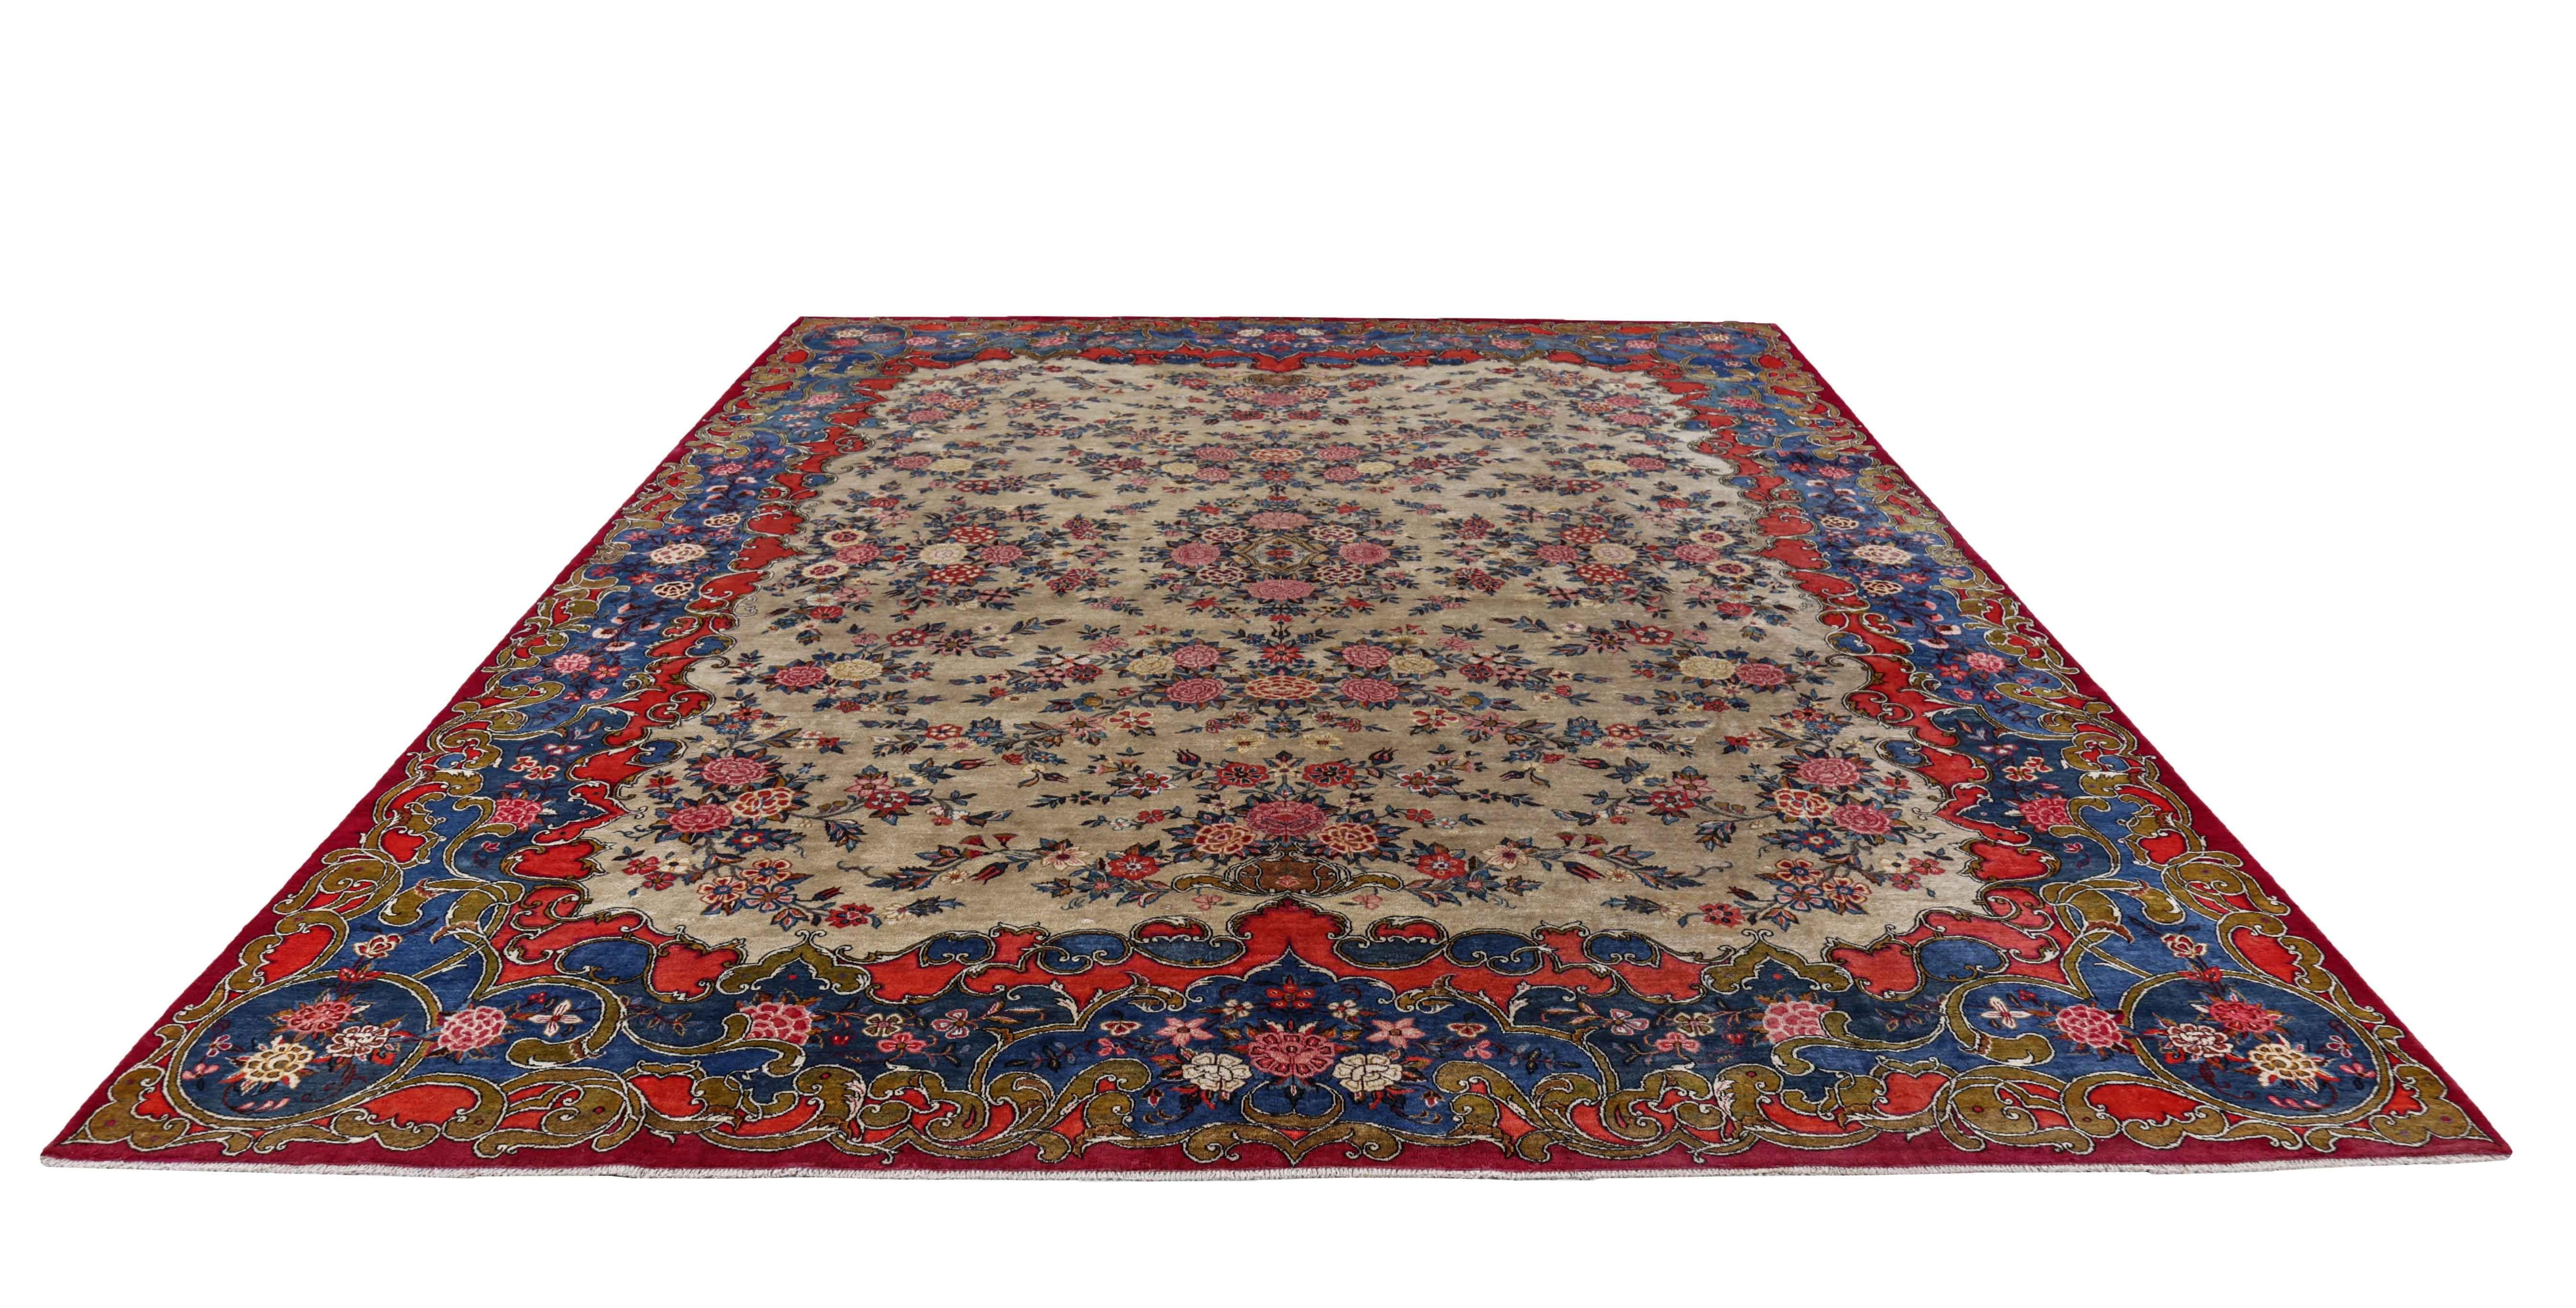 Antique Persian area rug handwoven from the finest sheep’s wool. It’s colored with all-natural vegetable dyes that are safe for humans and pets. It’s a traditional Kashan design handwoven by expert artisans. It’s a lovely area rug that can be